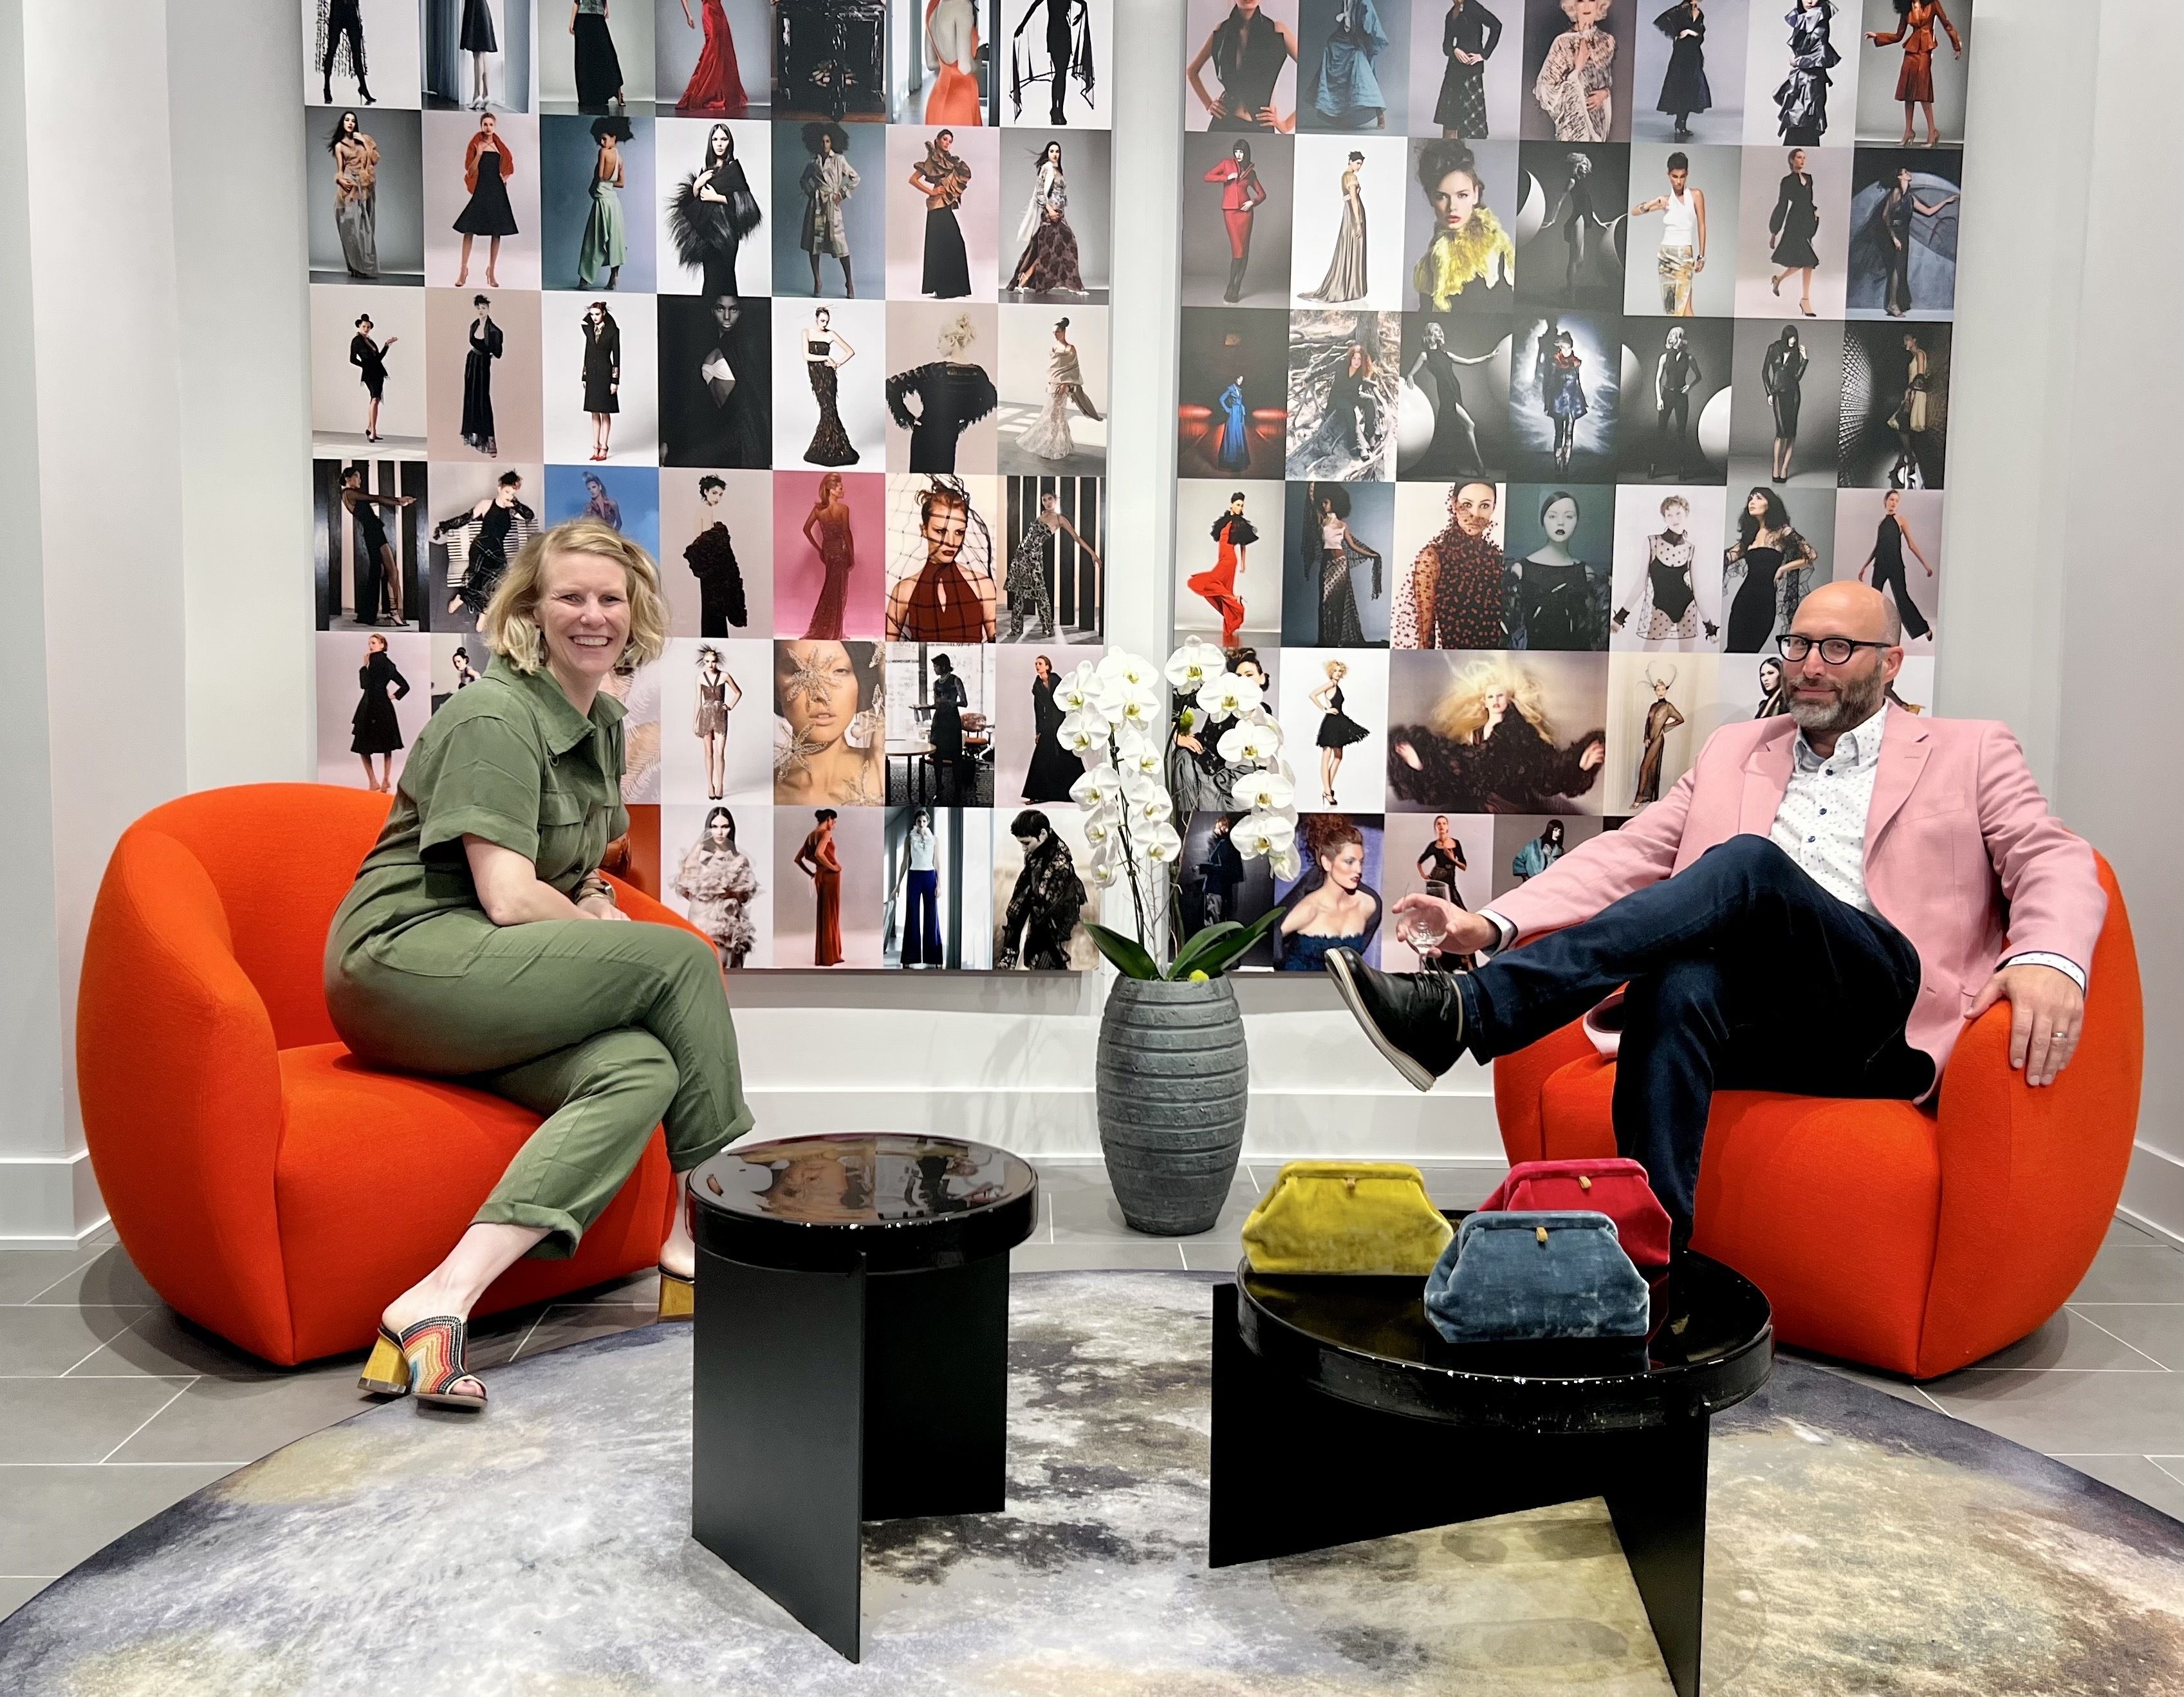 Wall with collage of models behind woman in green jumpsuit siting in orange chair next to man in pink blazer sitting in orange chair. Table in center with vase and flowers.